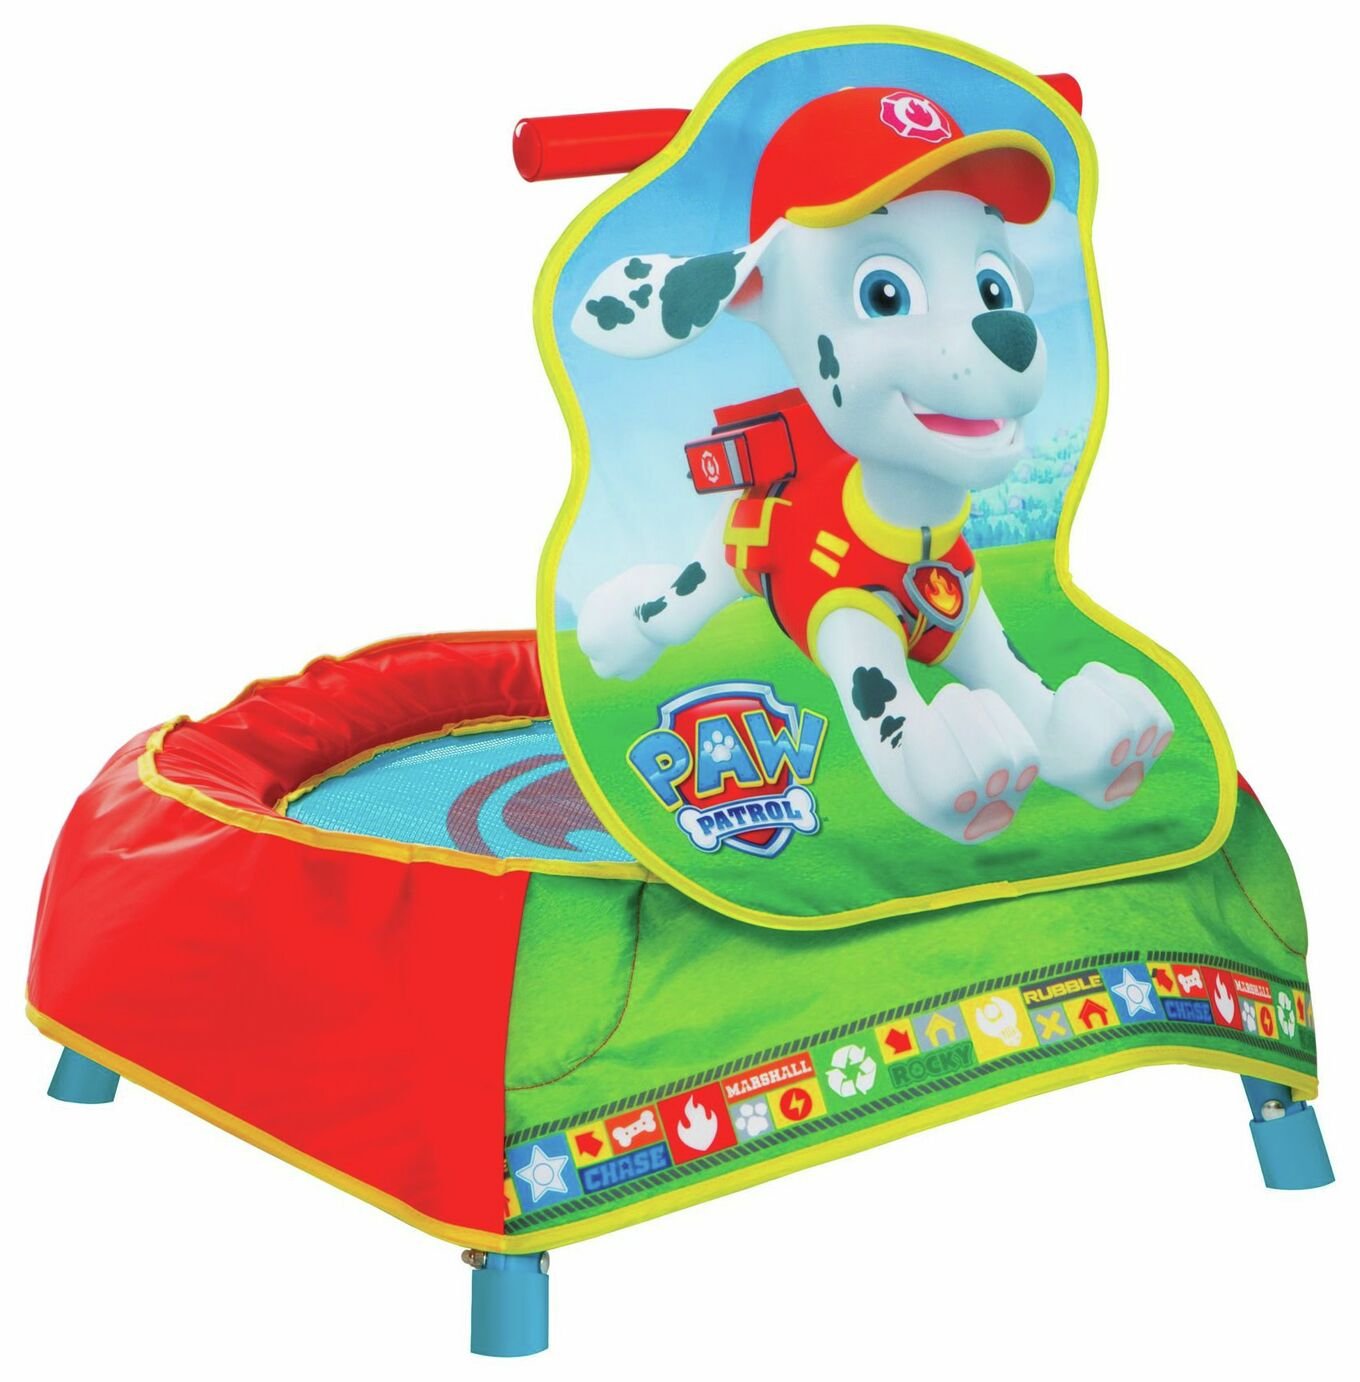 PAW Patrol Marshall Toddler Trampoline review